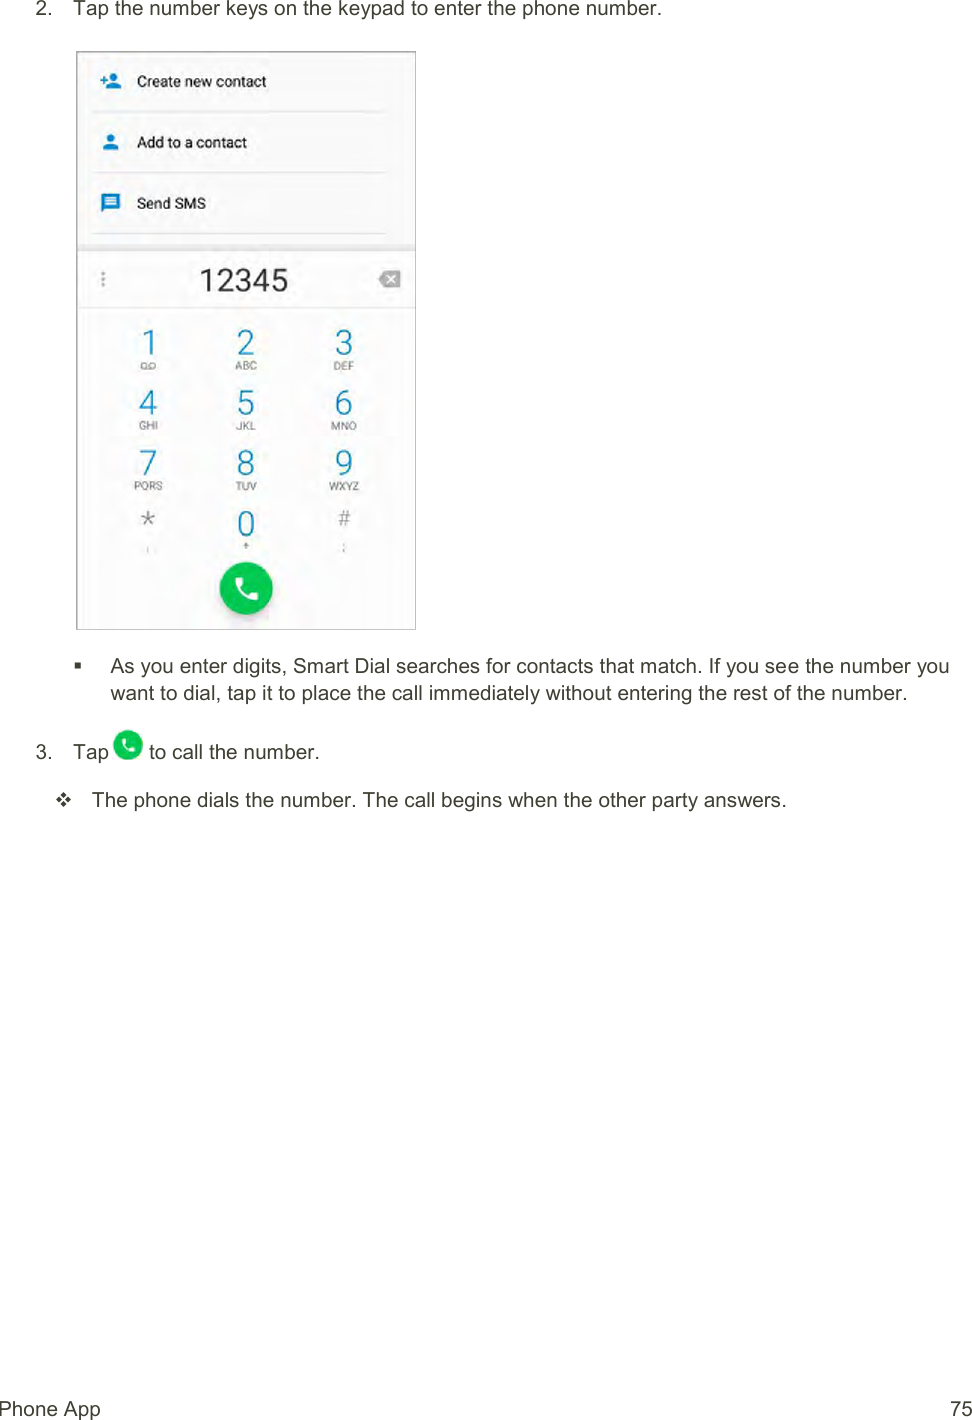 Phone App  75 2.  Tap the number keys on the keypad to enter the phone number.      As you enter digits, Smart Dial searches for contacts that match. If you see the number you want to dial, tap it to place the call immediately without entering the rest of the number. 3.  Tap  to call the number.   The phone dials the number. The call begins when the other party answers. 